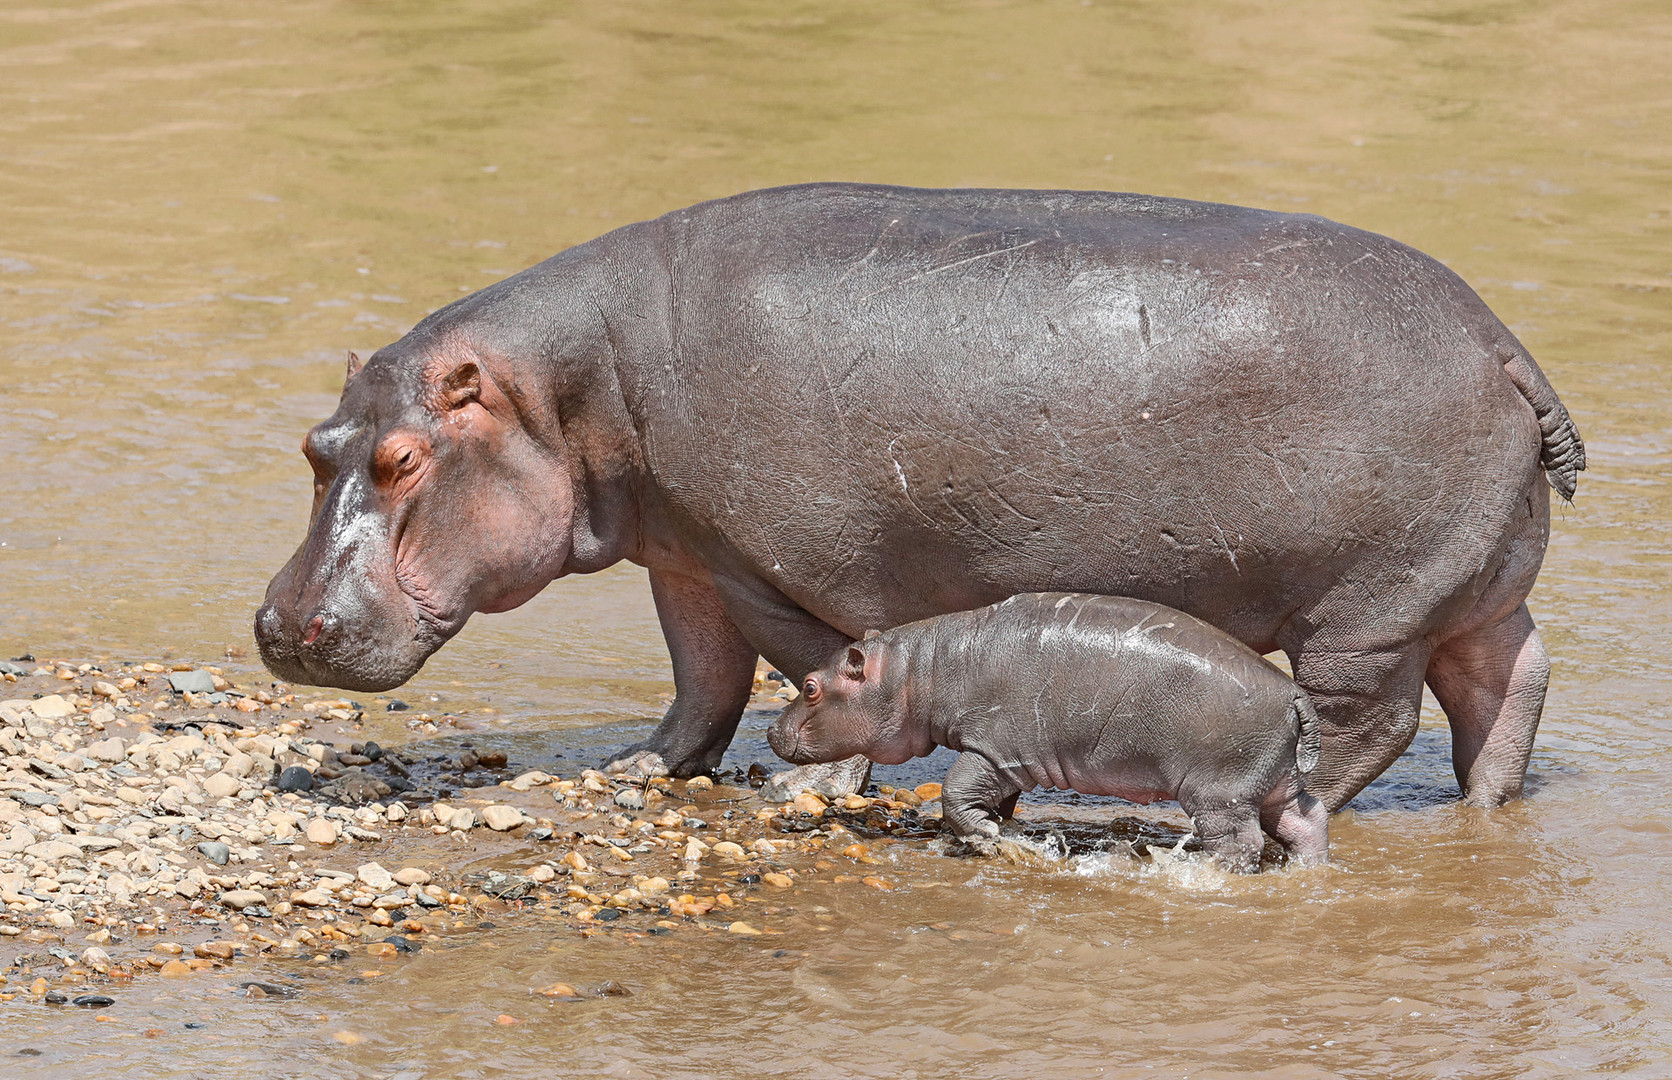 Hippo with child